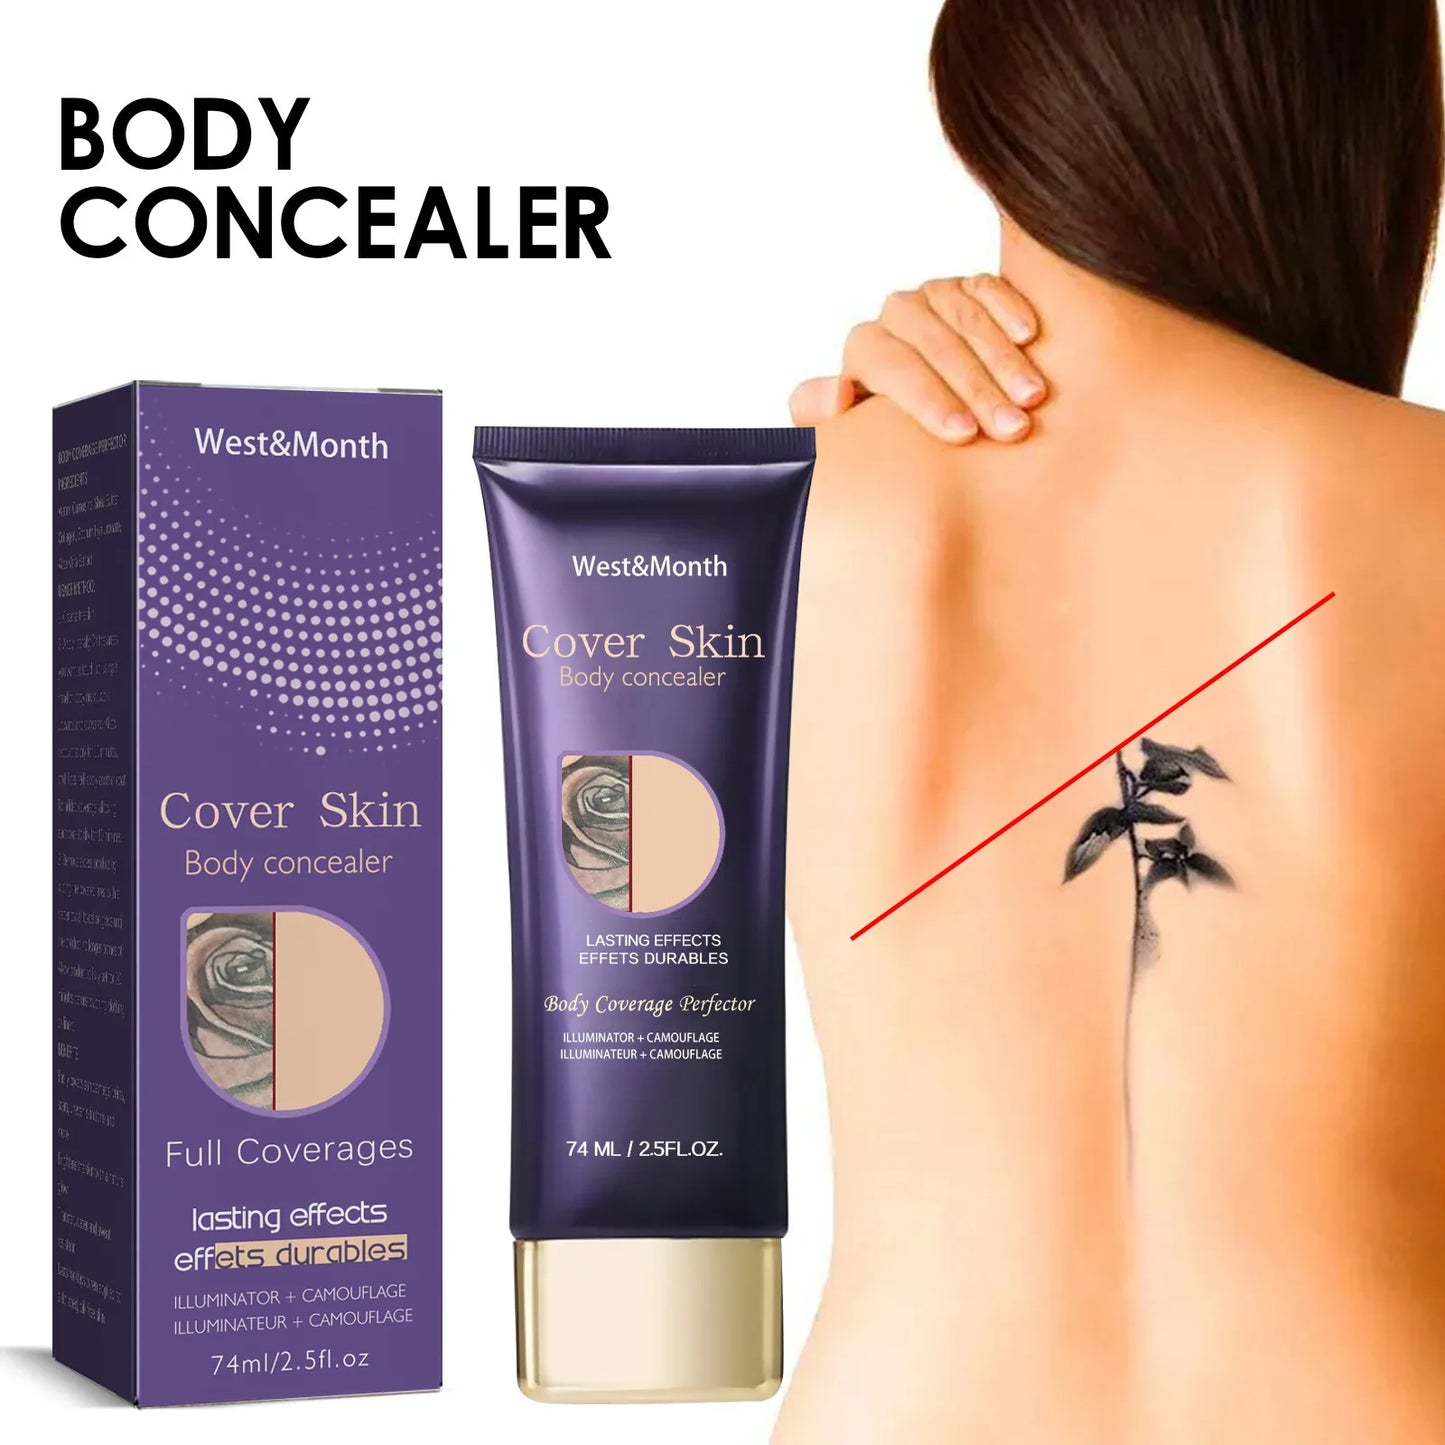 1x Complete Body Coverage Makeup 65%OFF